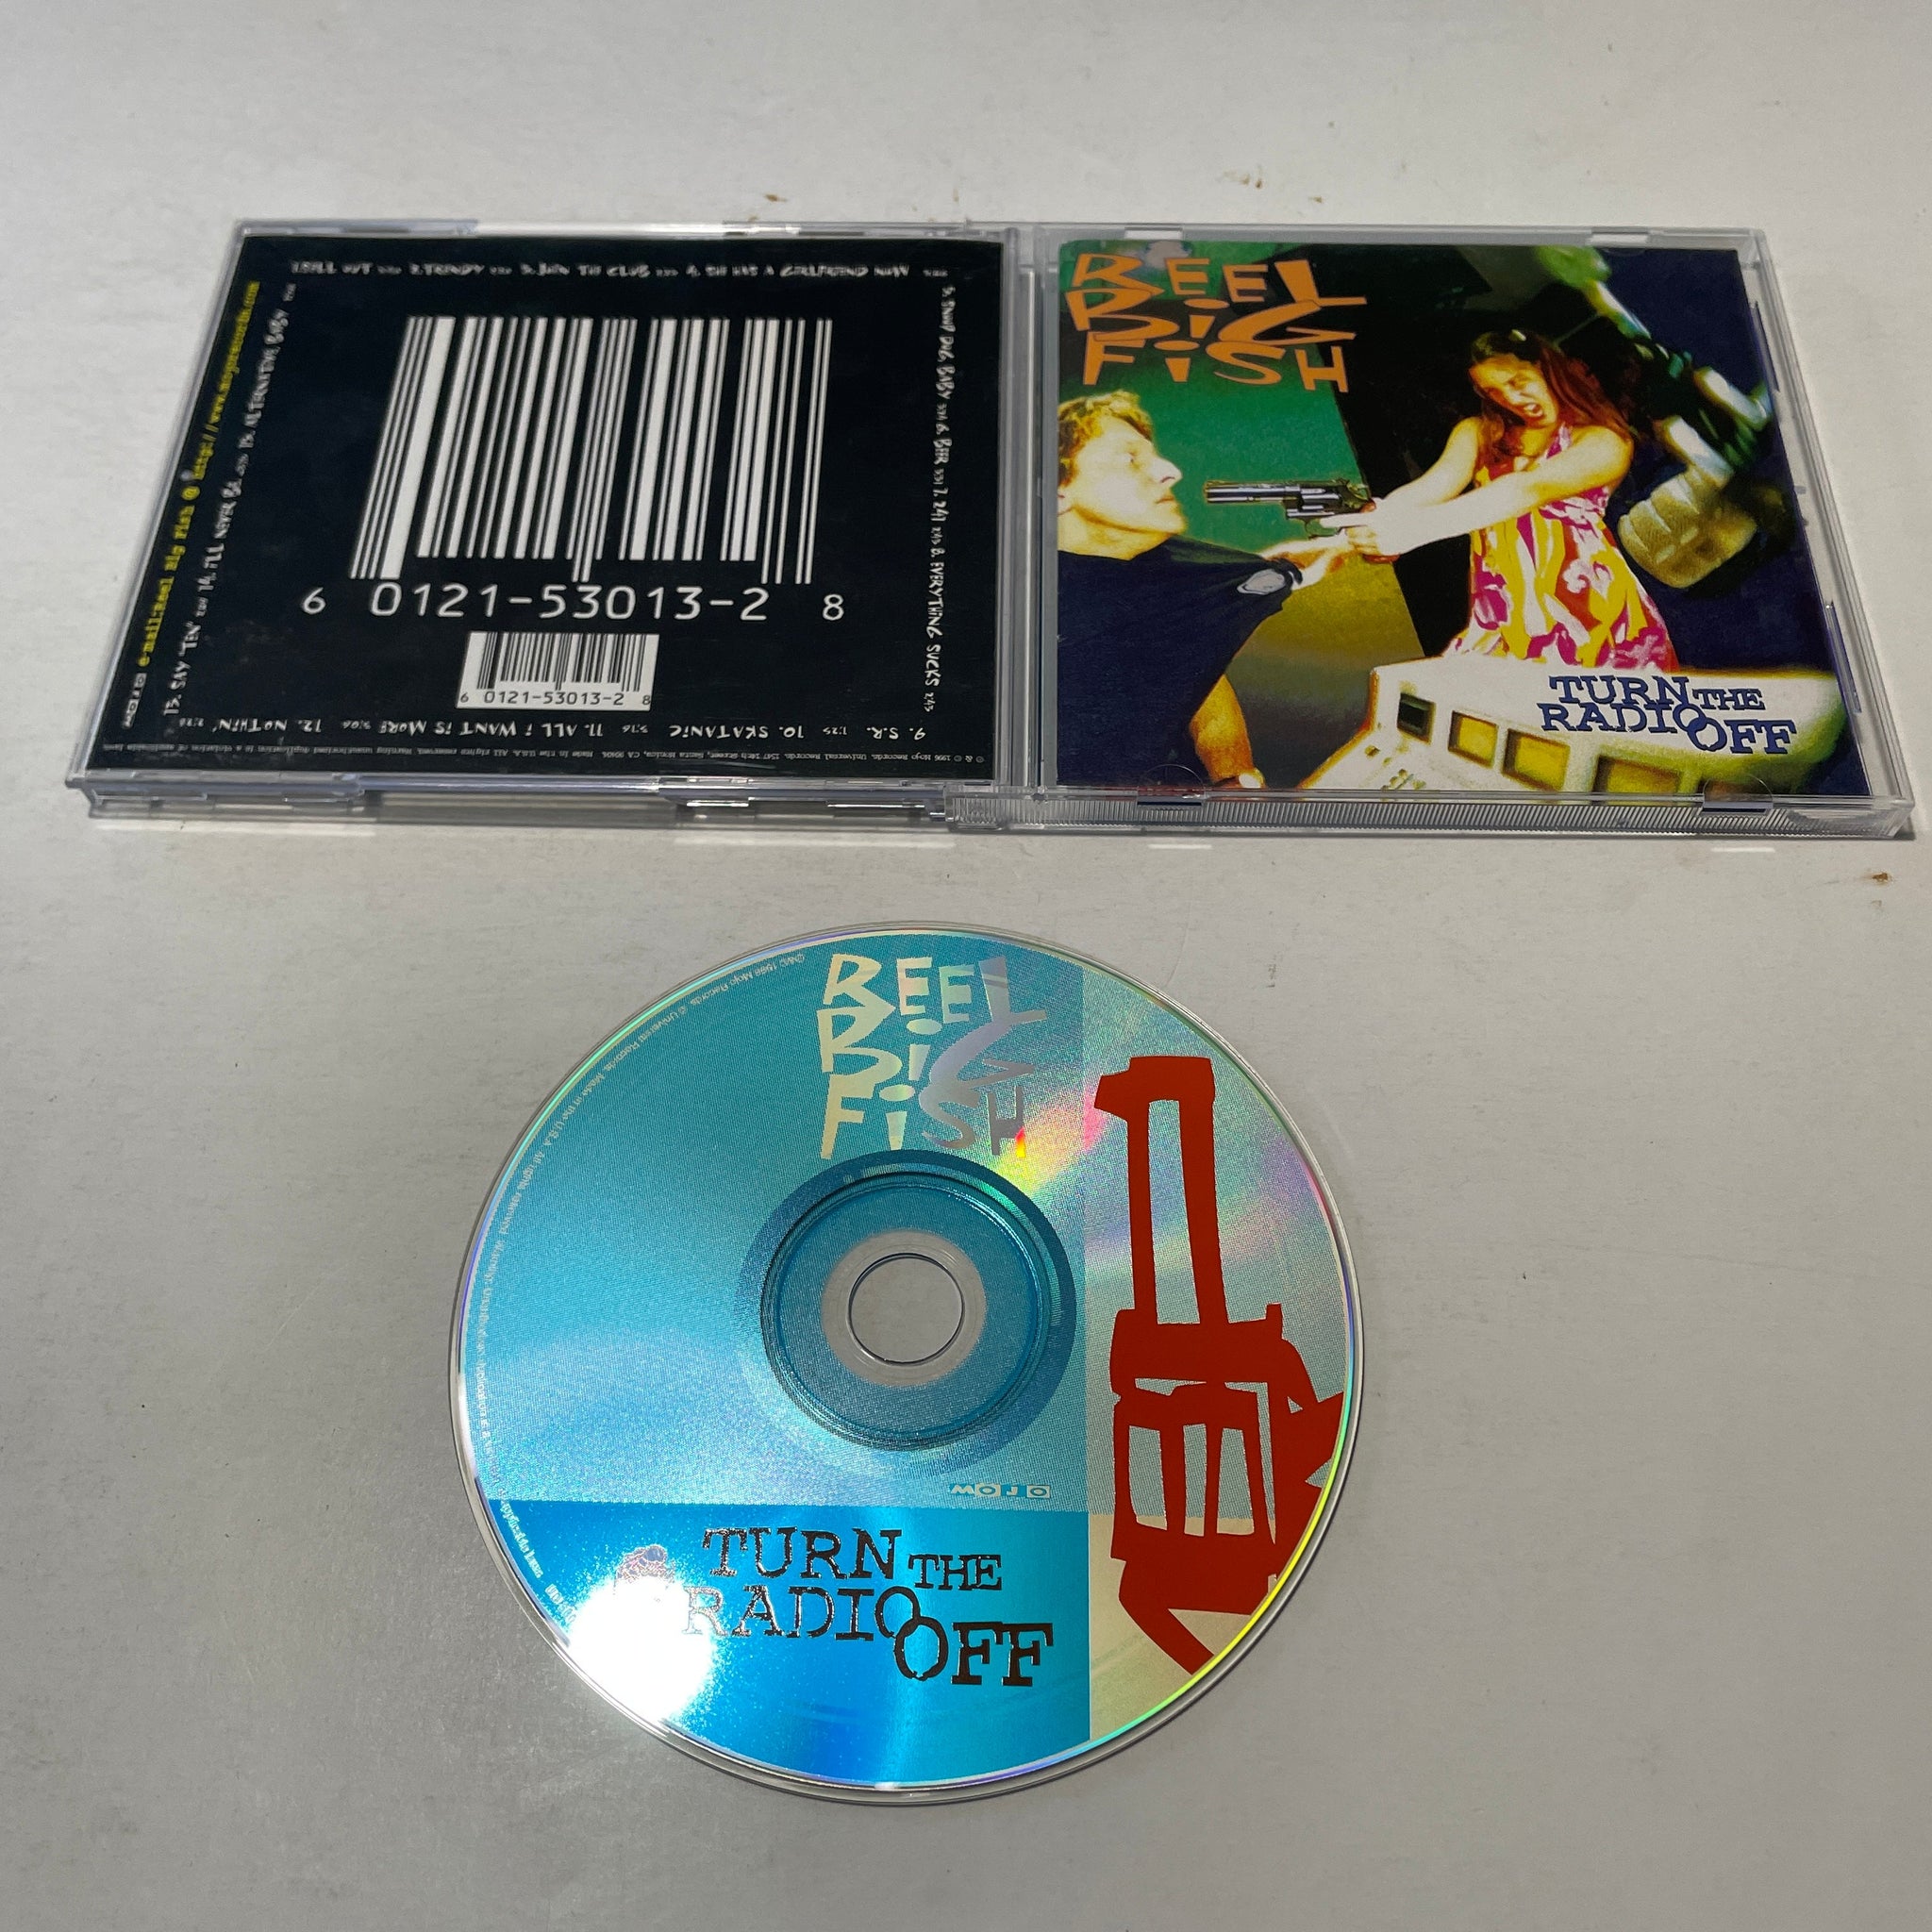 Reel Big Fish CD Collection Our Live Album Is Better Than Your Live Album  Genre Rock Gifts Vintage Music American Ska Punk Band